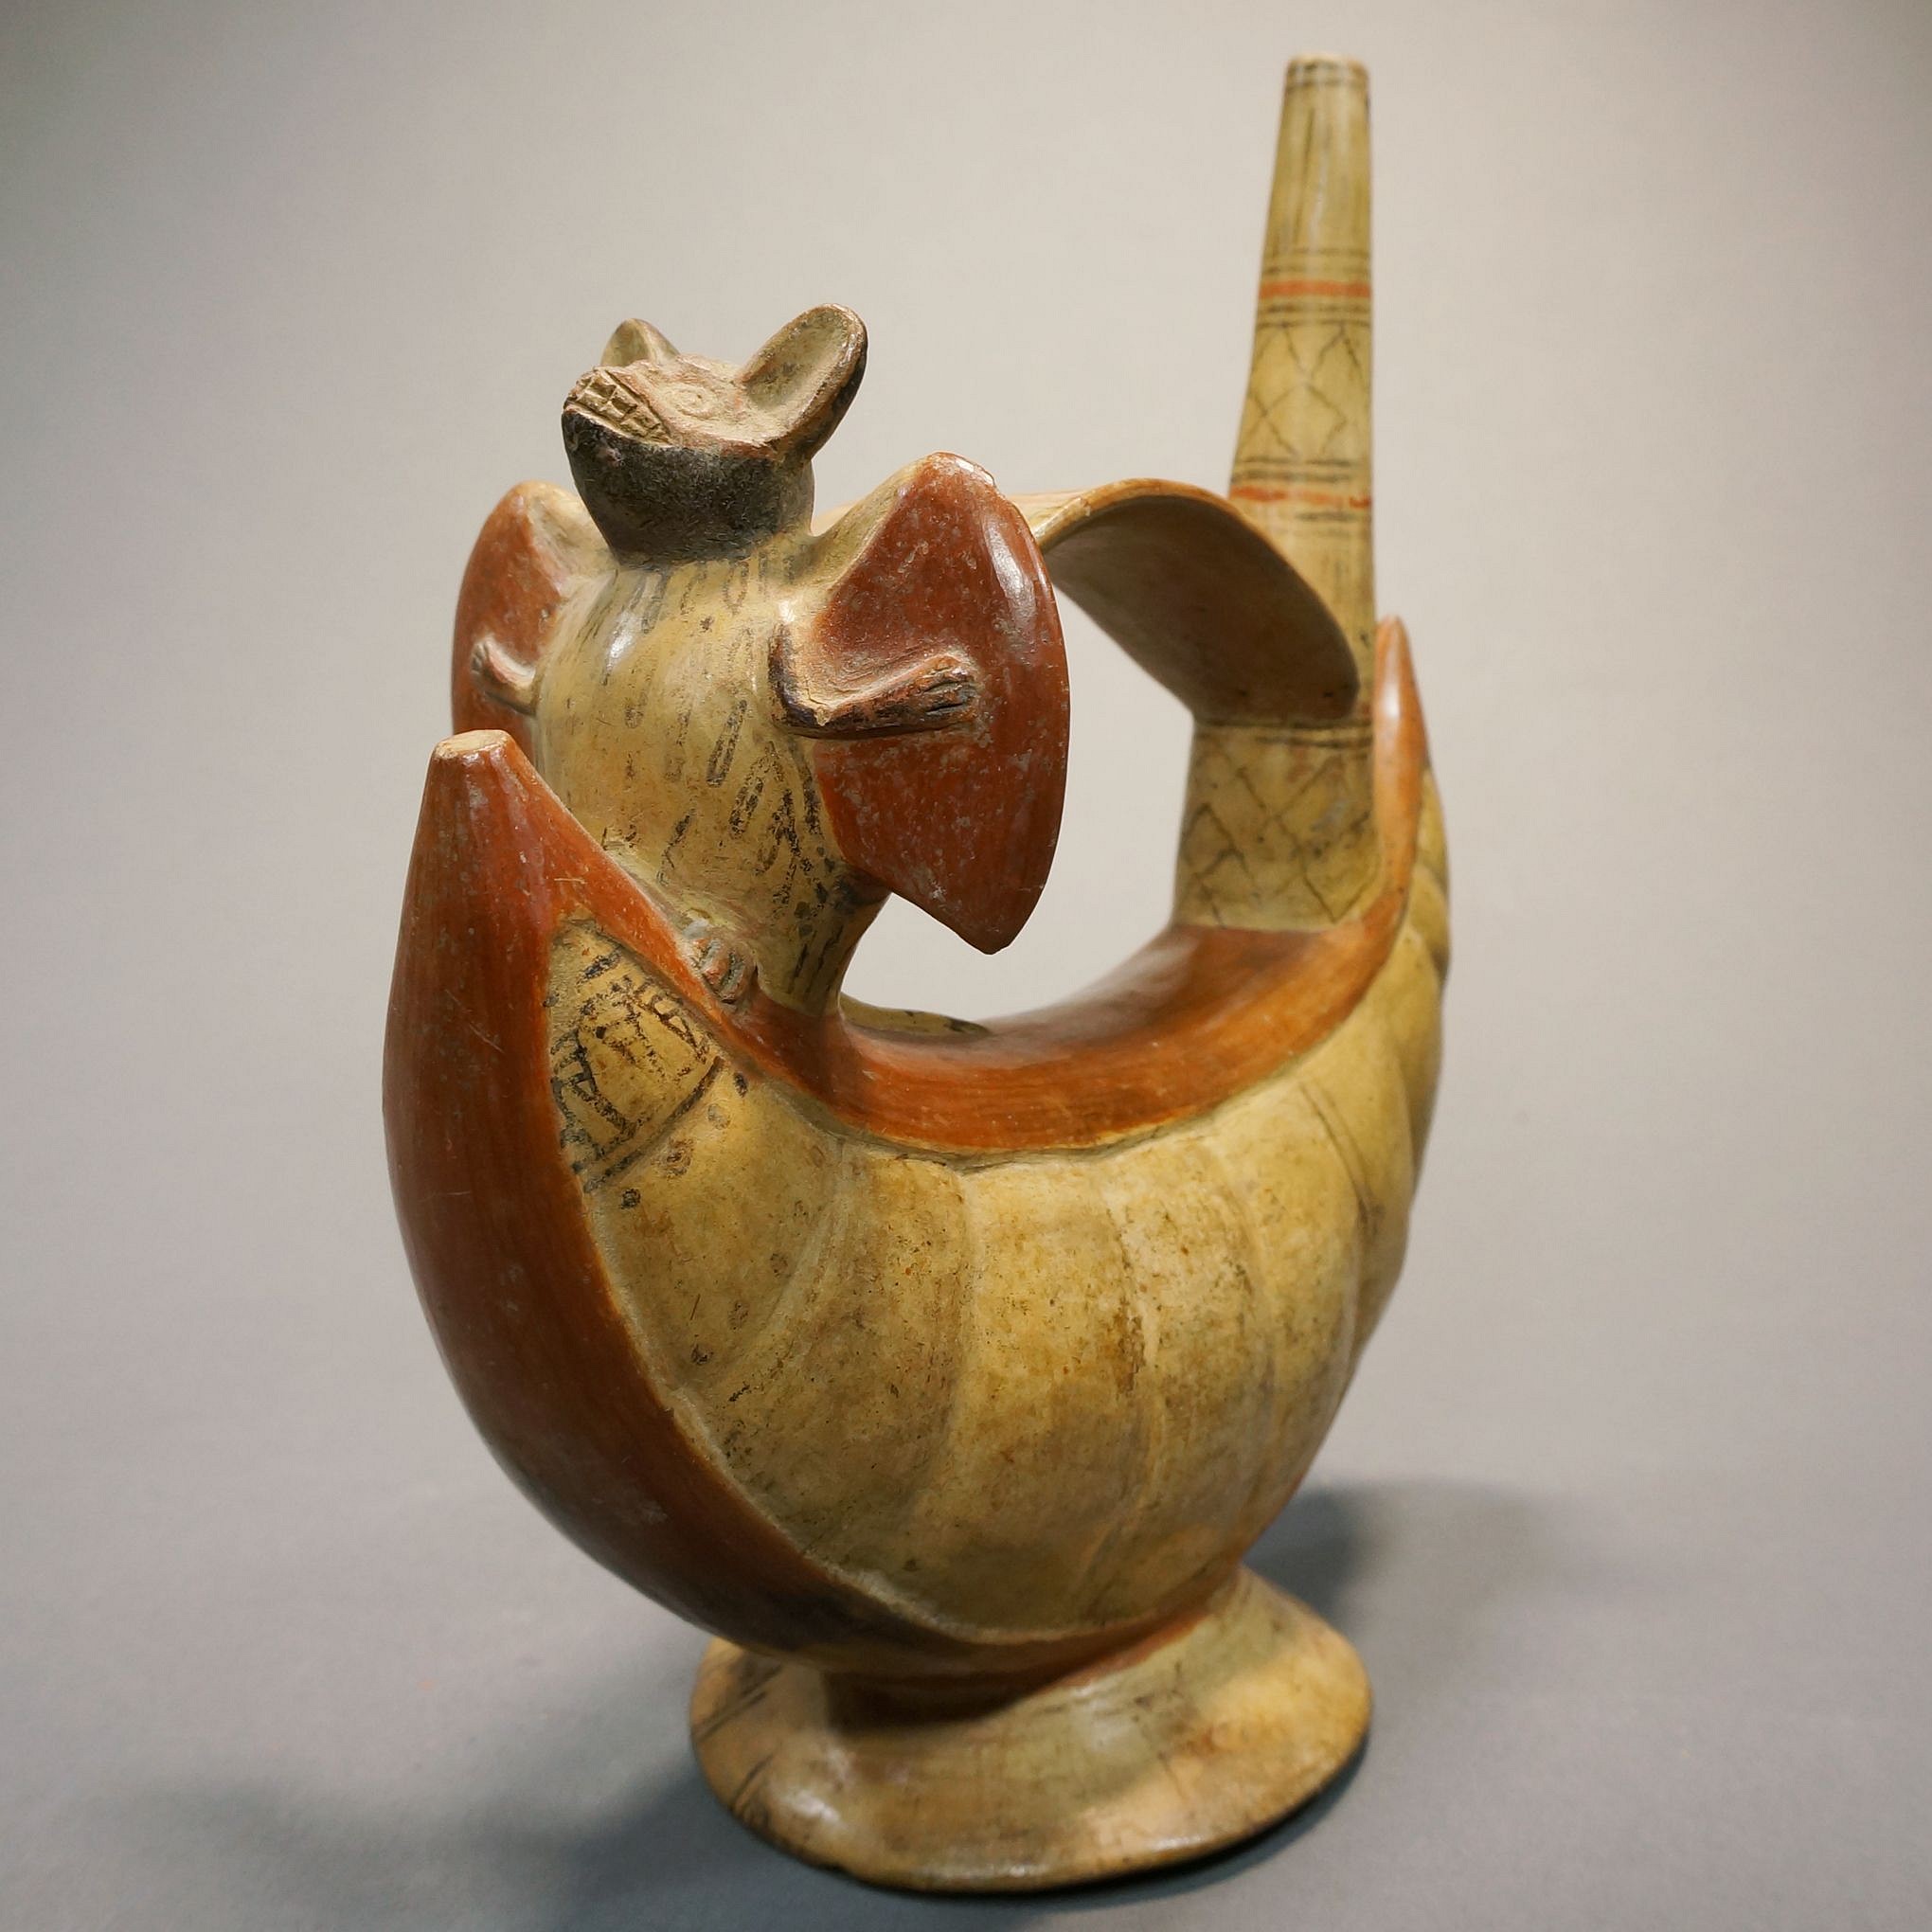 Peru, Lambayeque Whistling Vessel with Bat Atop Pacay Fruit
This ceramic bridge-spout whistling effigy vessel was crafted in the shape of fruit bat resting atop a Pacay.  The Pacay fruit, found in the Amazon, is related to mangoes and guavas.  Fruit bats have an extremely good sense of smell and sharp teeth with which to open the tough skins of fruits.  The whistle built into the vessel, customary for Lambayeque vessels, is seen just behind the bat.  Bats are a rare motif and quite meaningful in ancient Andean mythology as they are associated with transport to other worlds.  The vessel was painted with orange slip and black octopus ink on a buff ceramic ground.  There are only two other known Lambayeque vessels with sculptures of bats, one is illustrated in "Ceramics of Ancient Peru" by Christopher Donnan, 1992, p.89, and the other is the property of The American Museum of Natural History.
Media: Ceramic
Dimensions: Height 8" x Length 6 1/2"
Price Upon Request
mm145